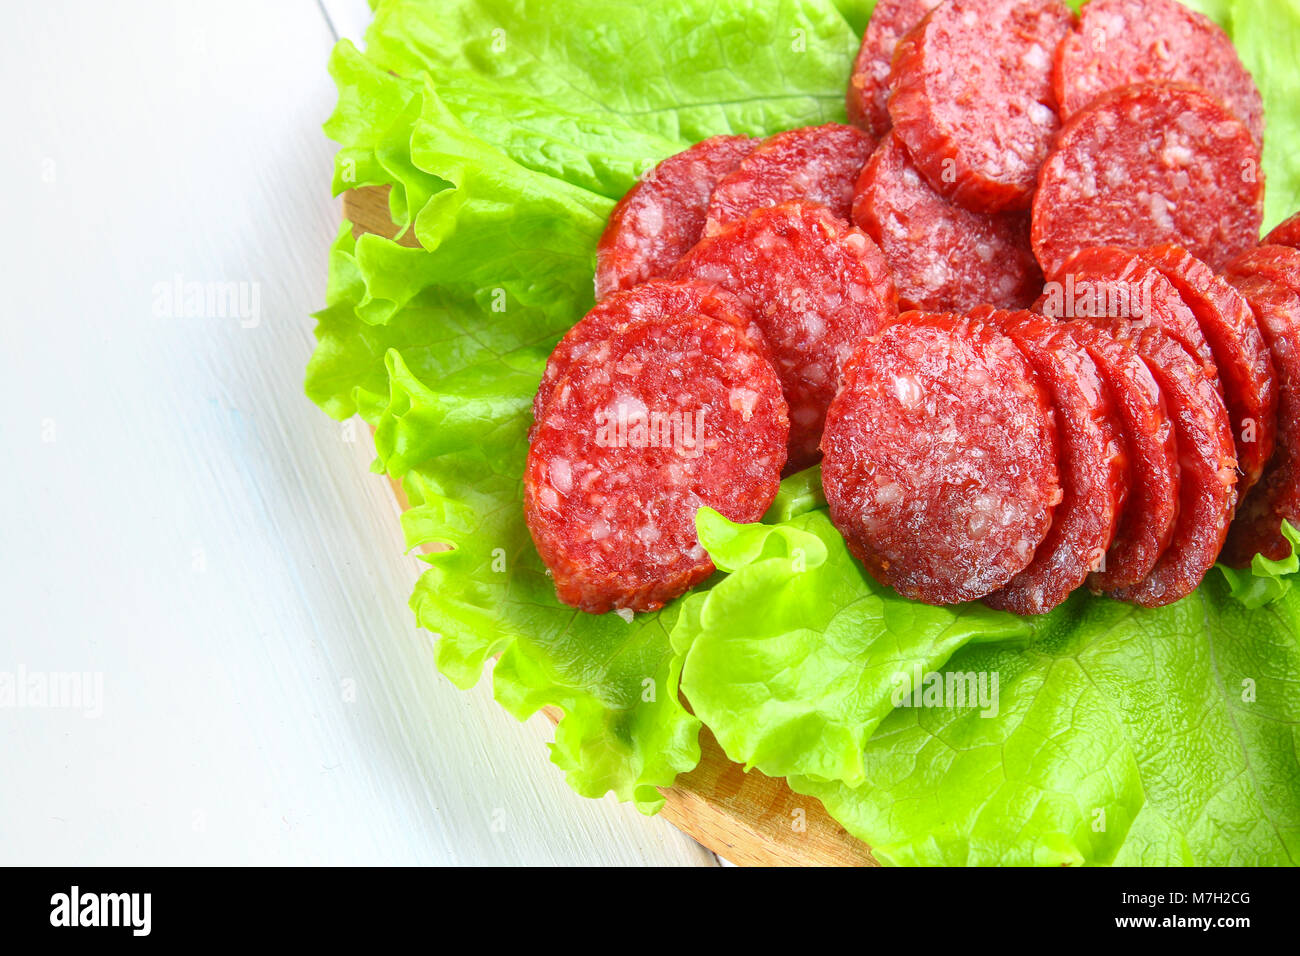 Smoked sausage, salami chopped in slices on a salad on a wooden circular cutting board on a white table Stock Photo